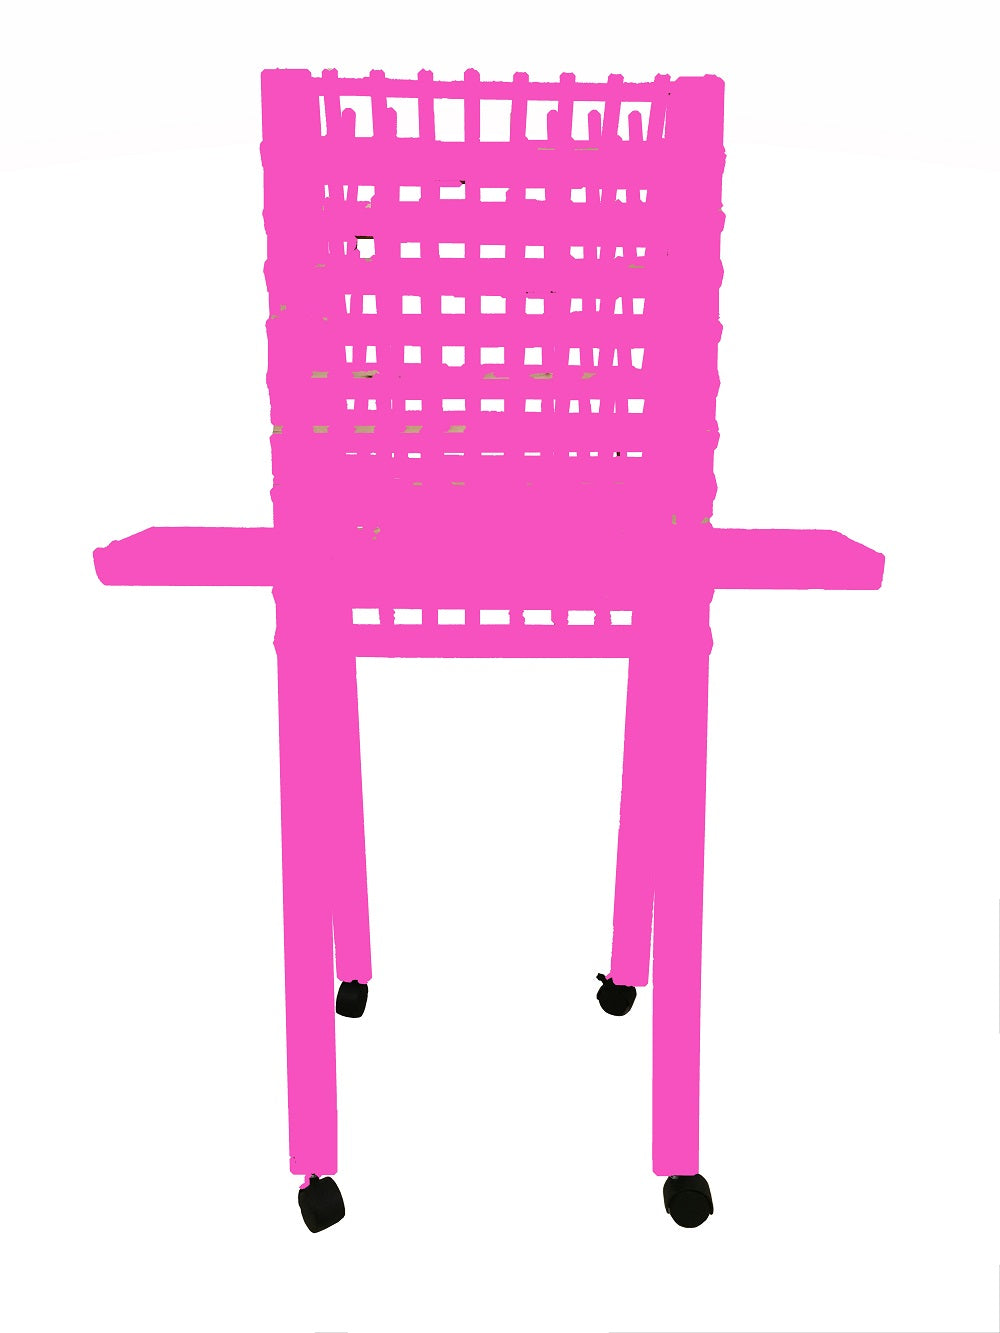 Easel MAX - Berry Pink